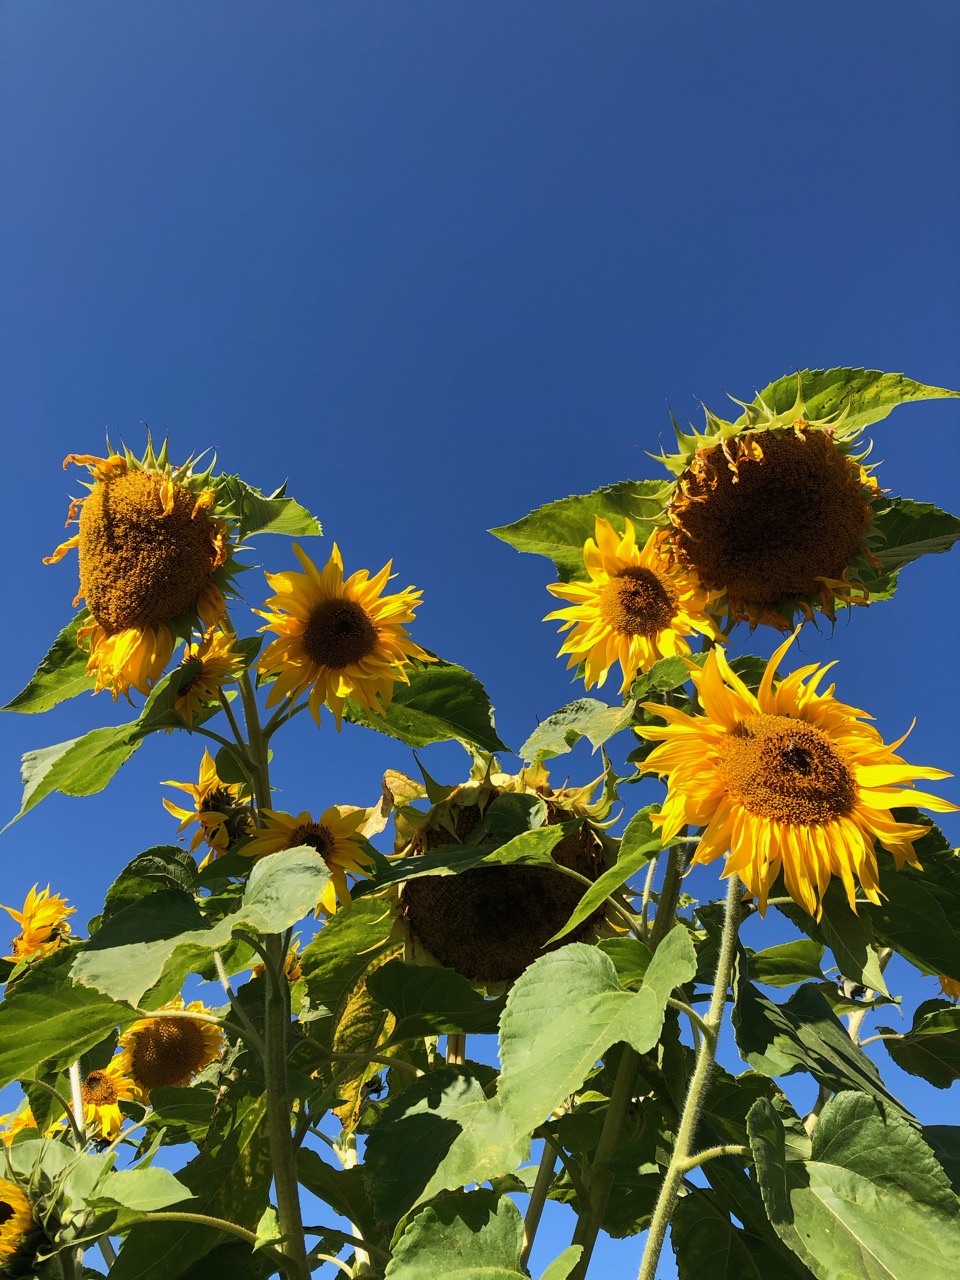 Sunflowers with blue sky in the background